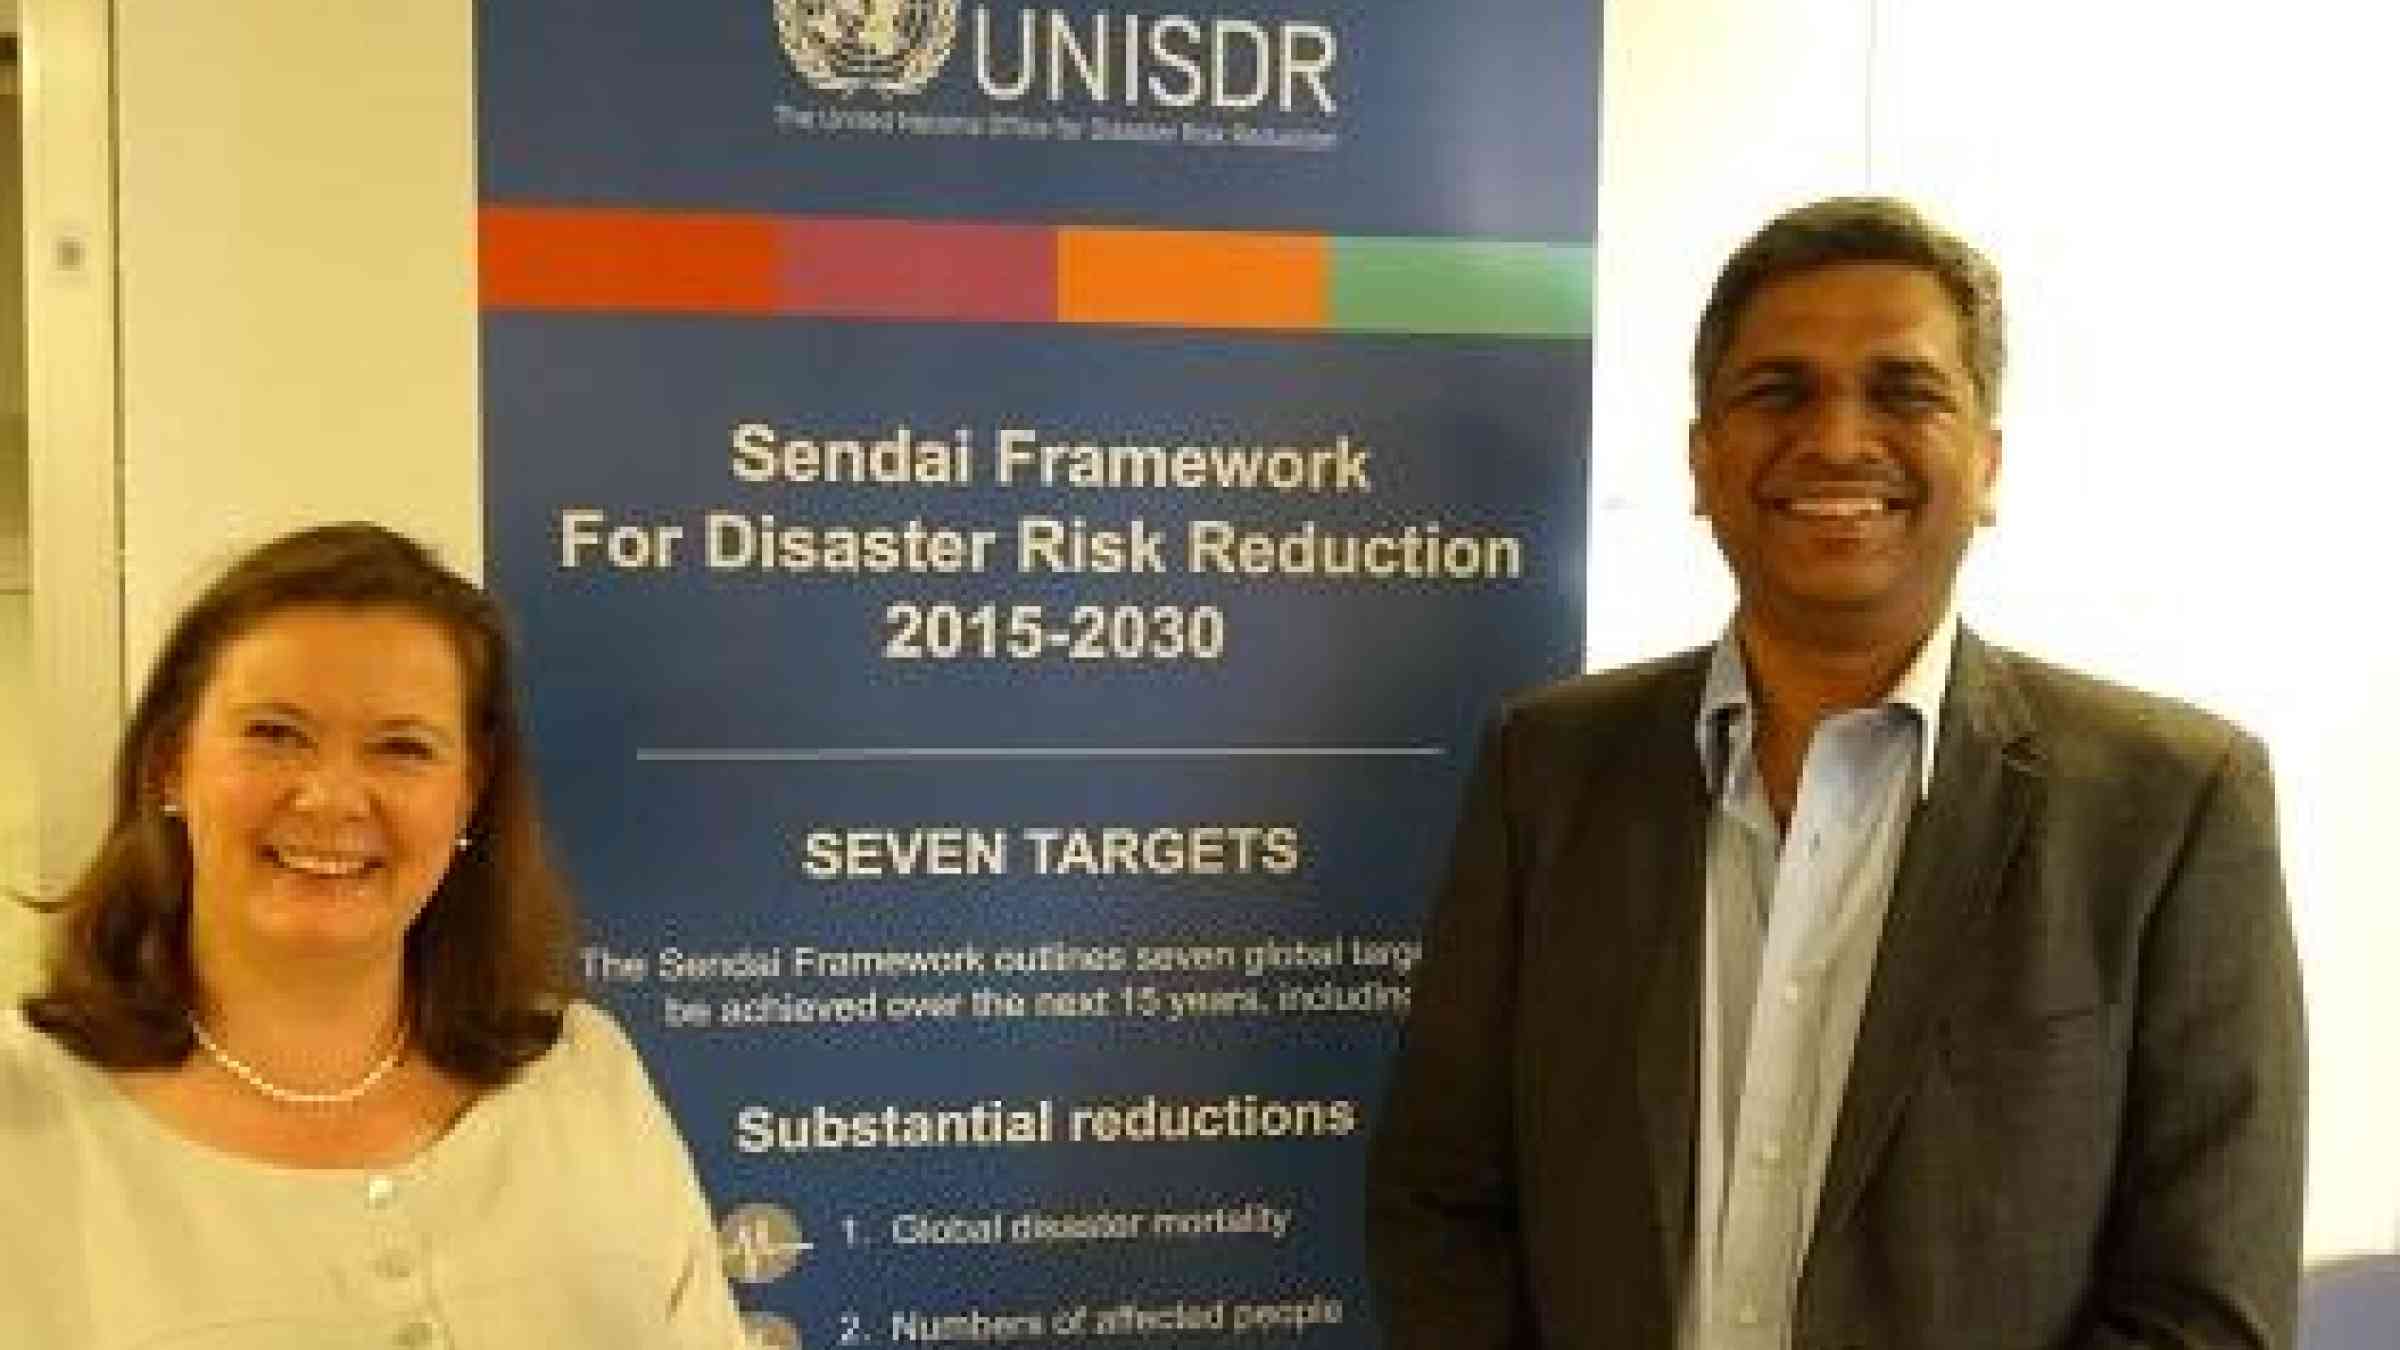 Ms. Kirsi Madi, Director of UNISDR, with Mr. Manu Gupta, founder and director of SEEDS, on his recent visit to UNISDR in Geneva